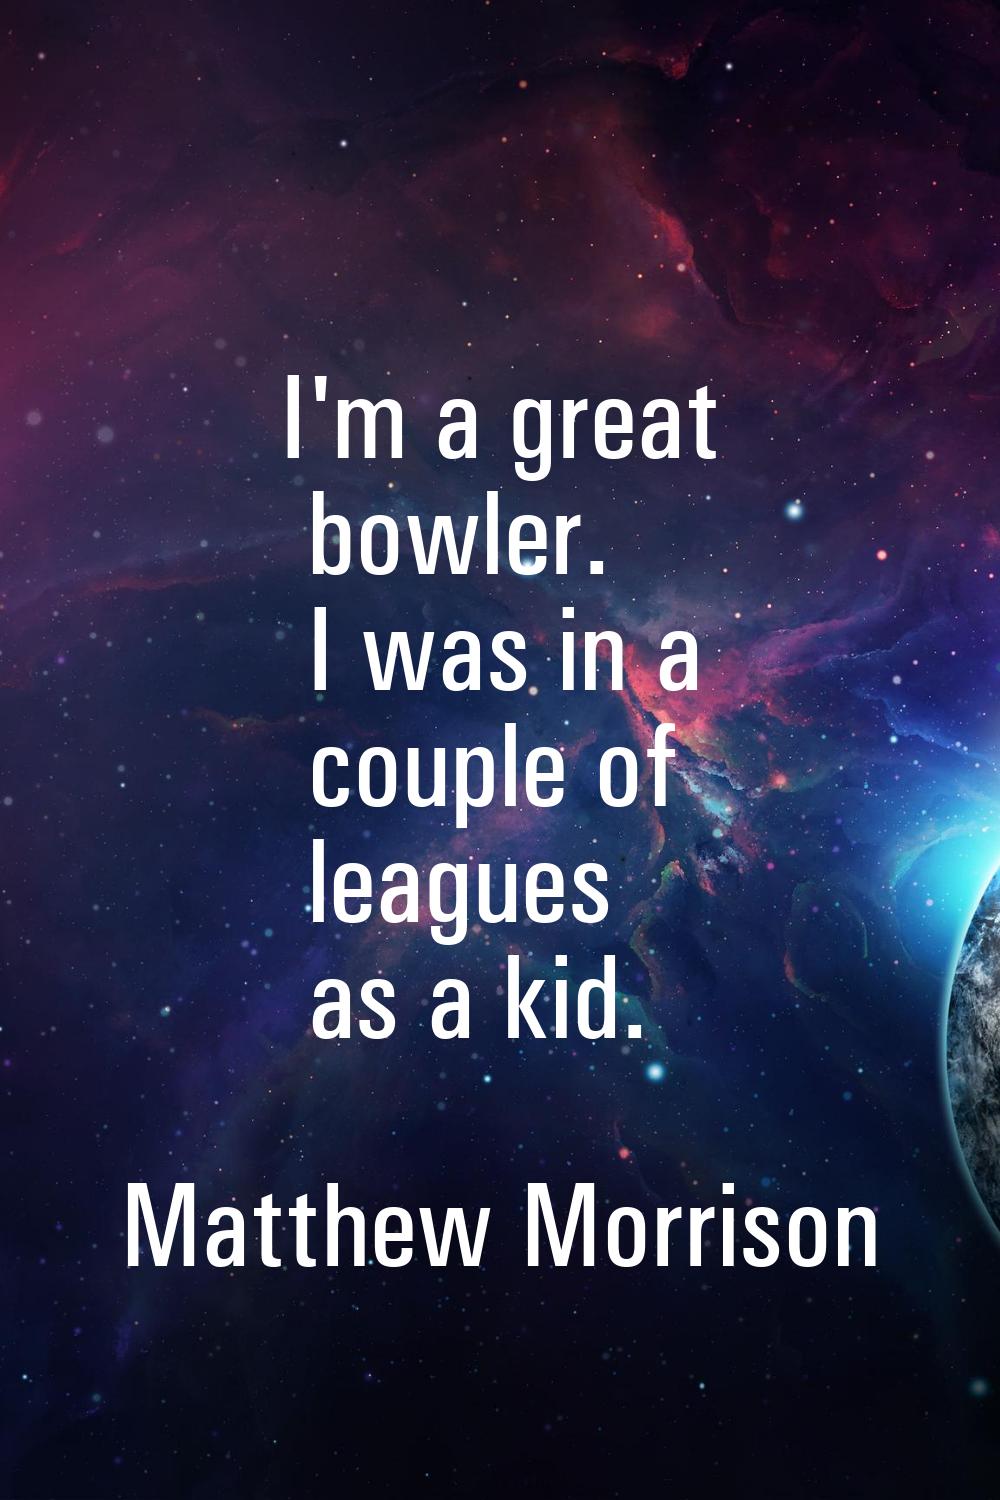 I'm a great bowler. I was in a couple of leagues as a kid.